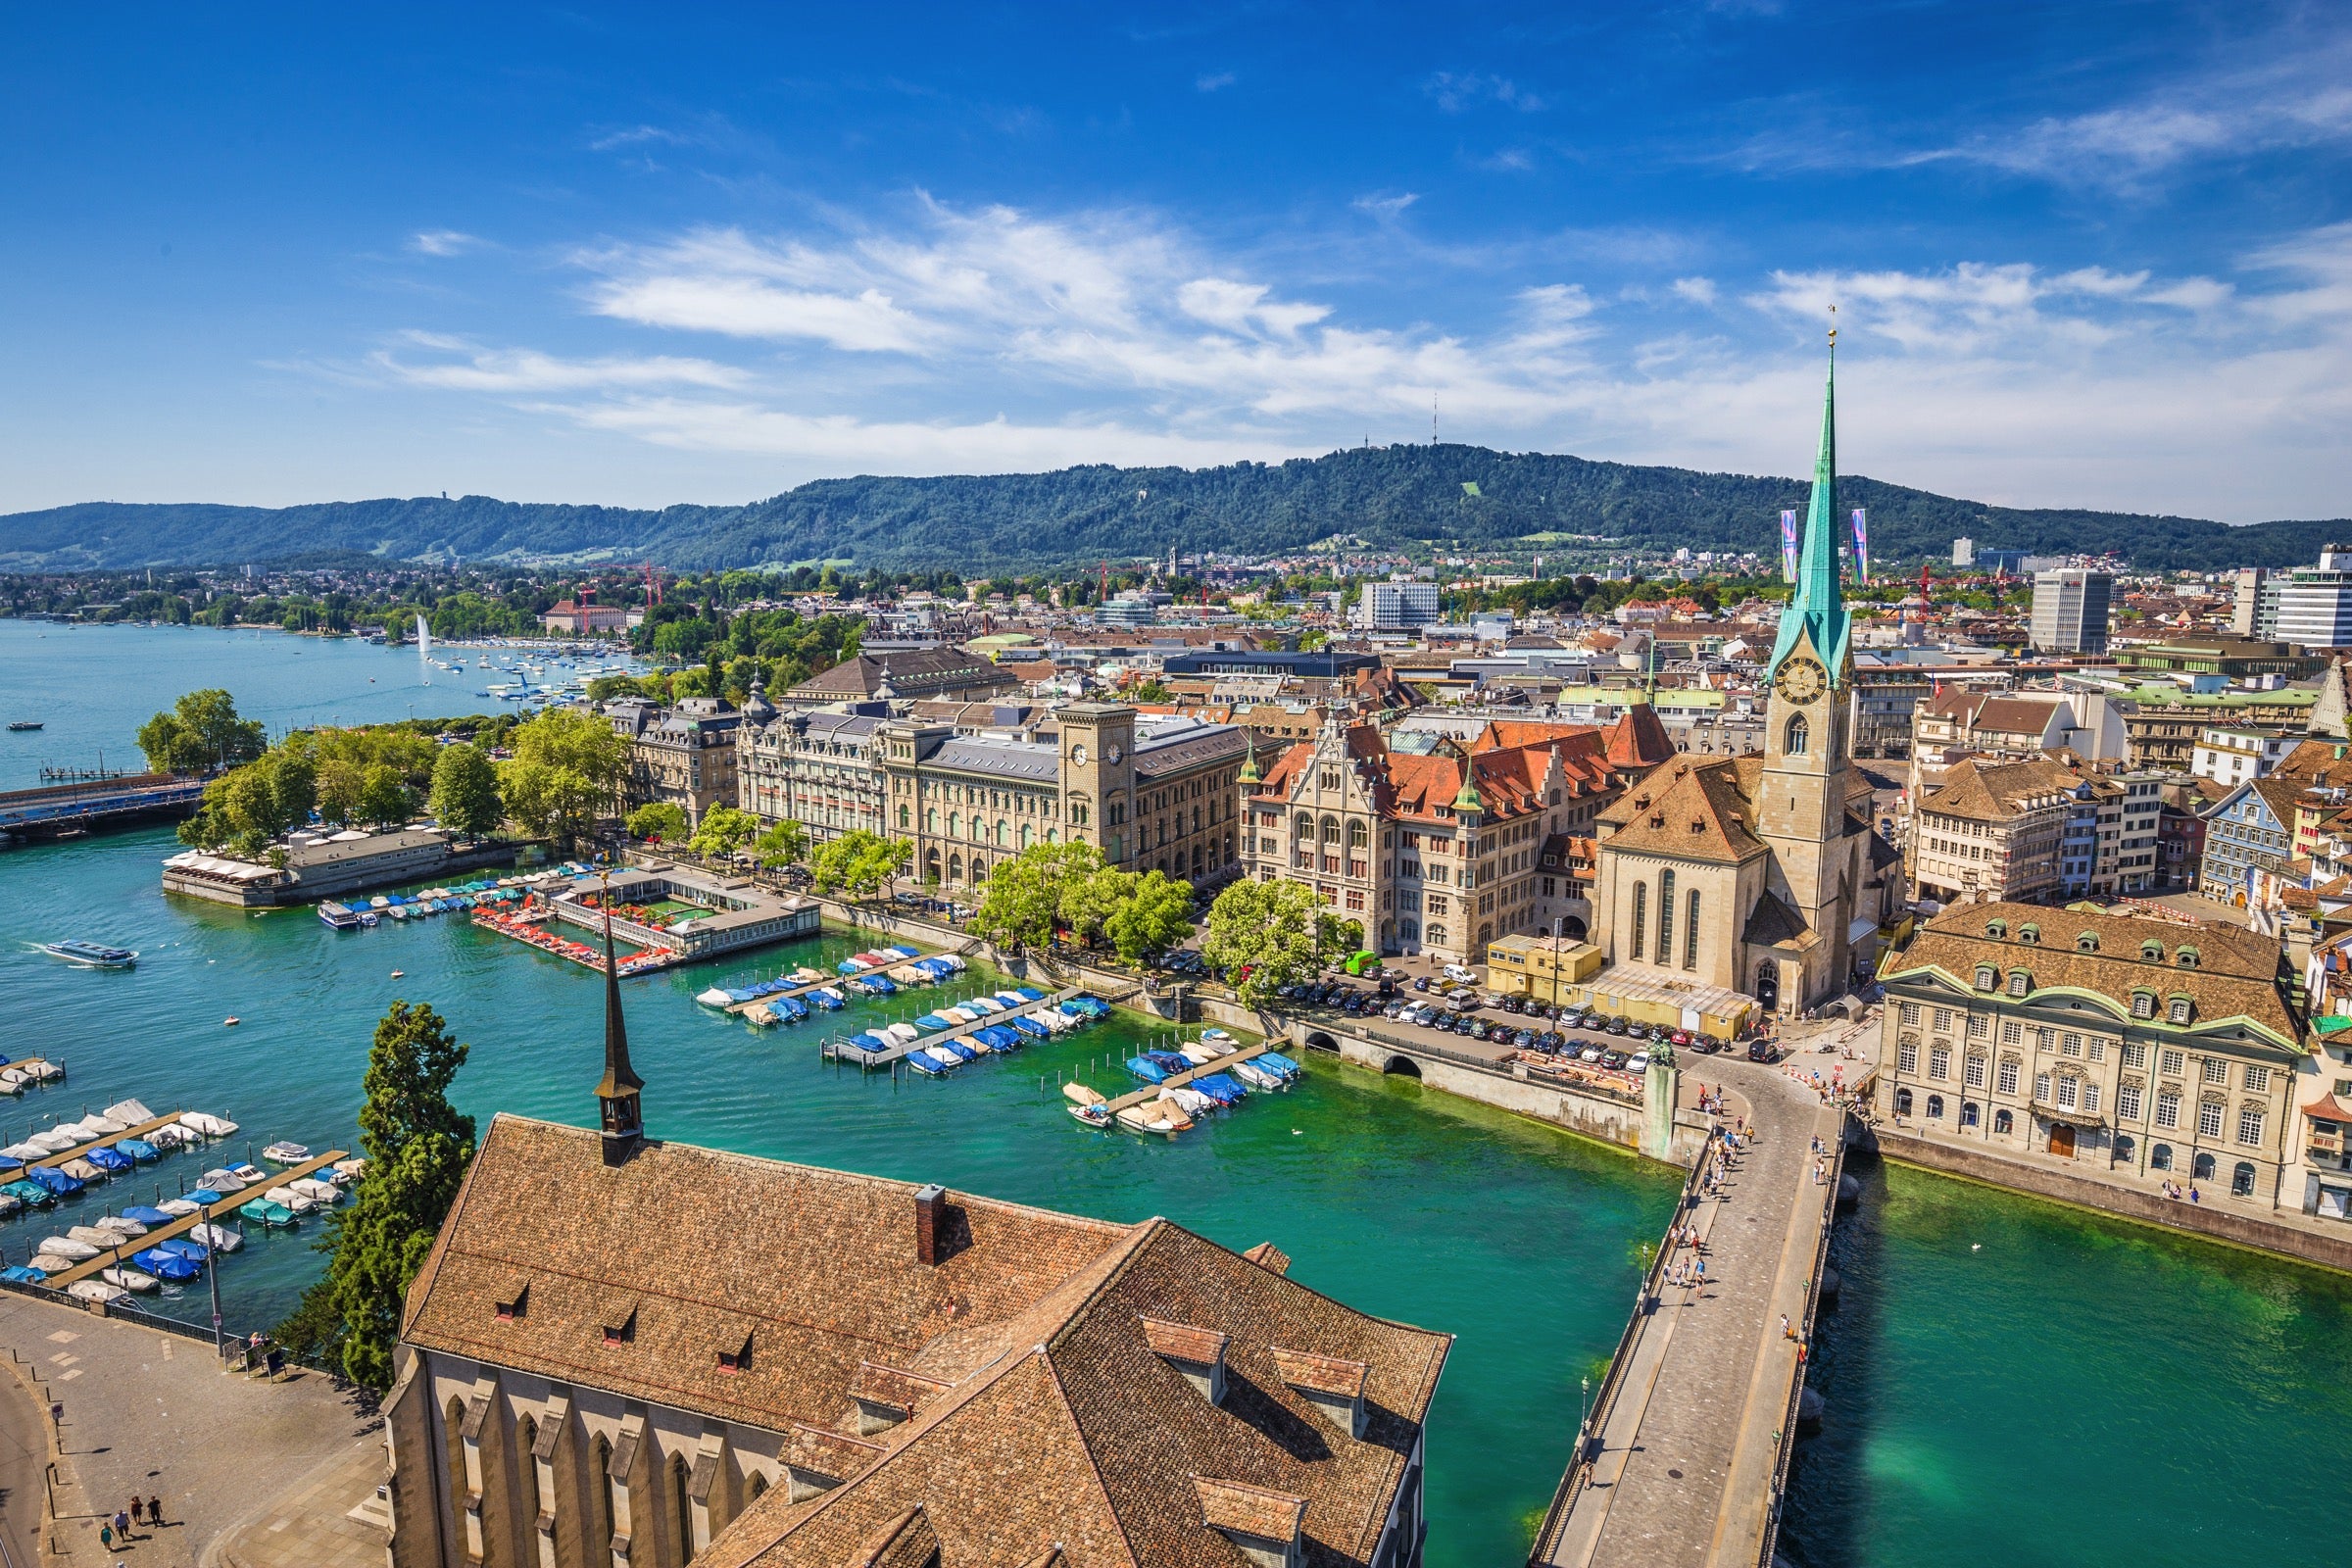 A view of Zurich from above